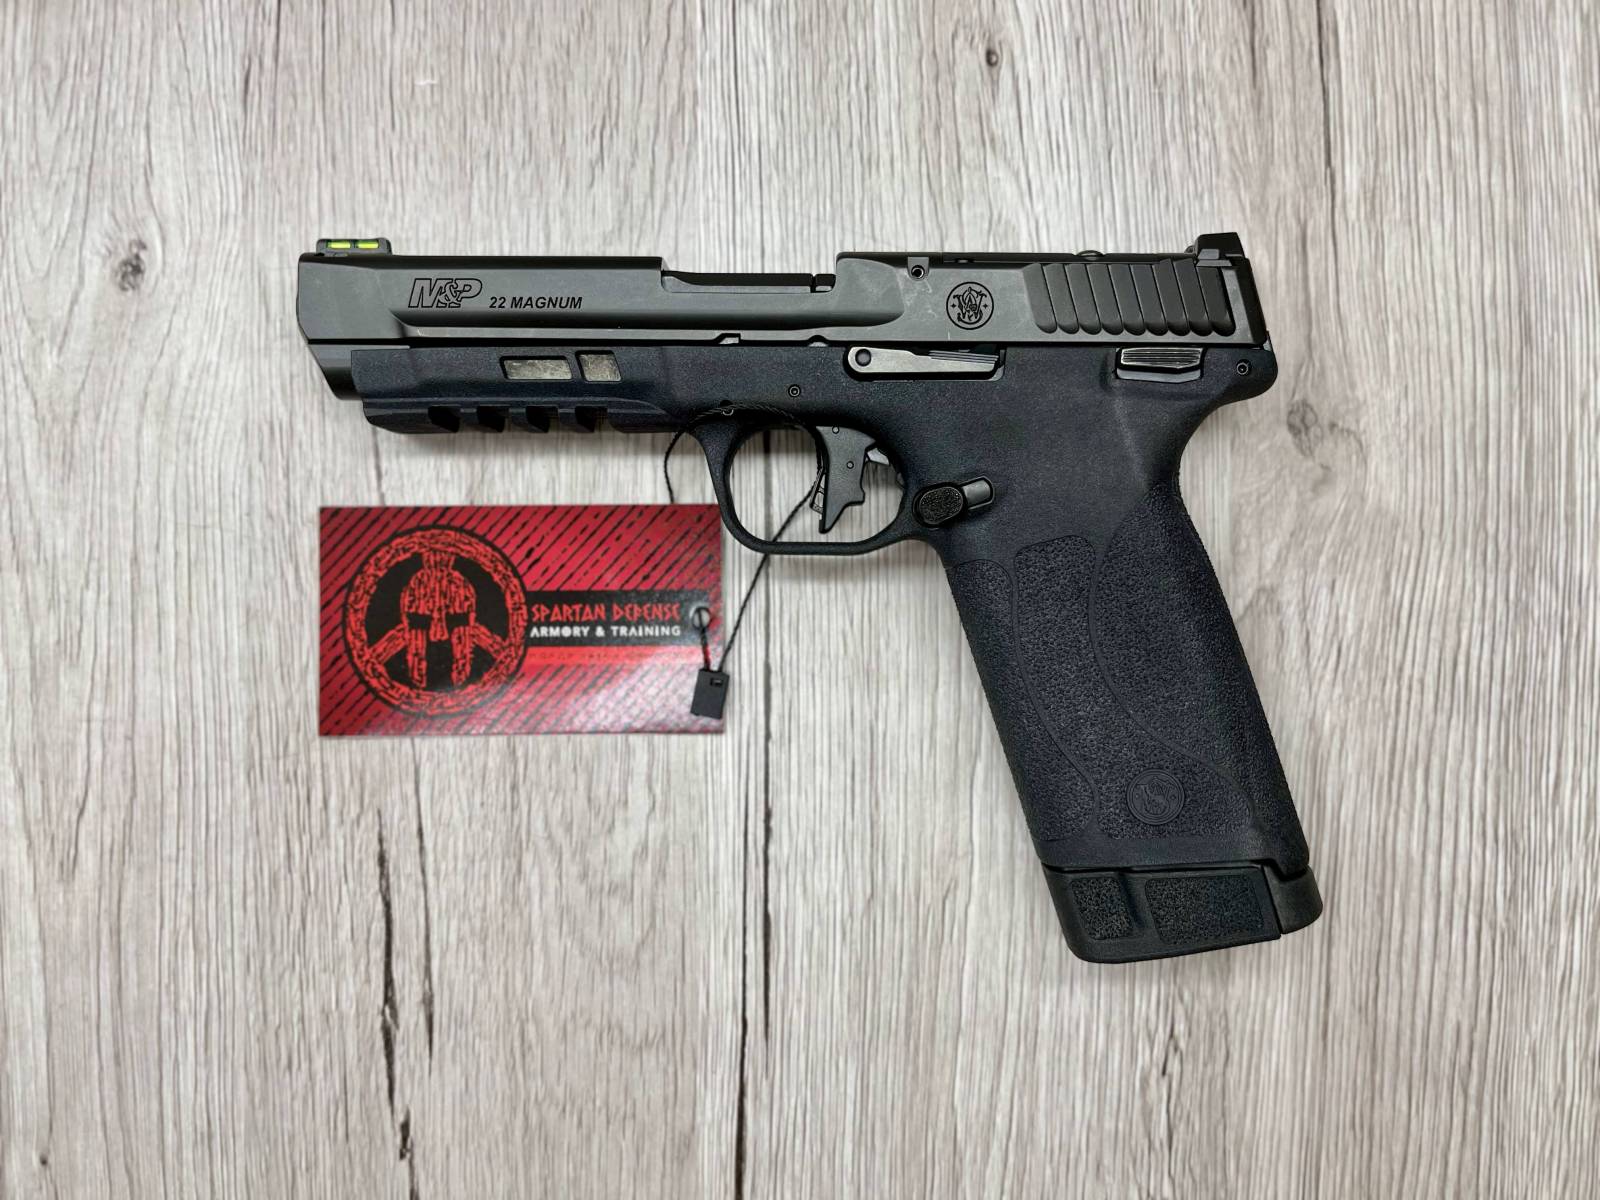 Smith & Wesson M&P 22 Magnum 22 WMR 30+1 (2) 4.35" 13433-img-2